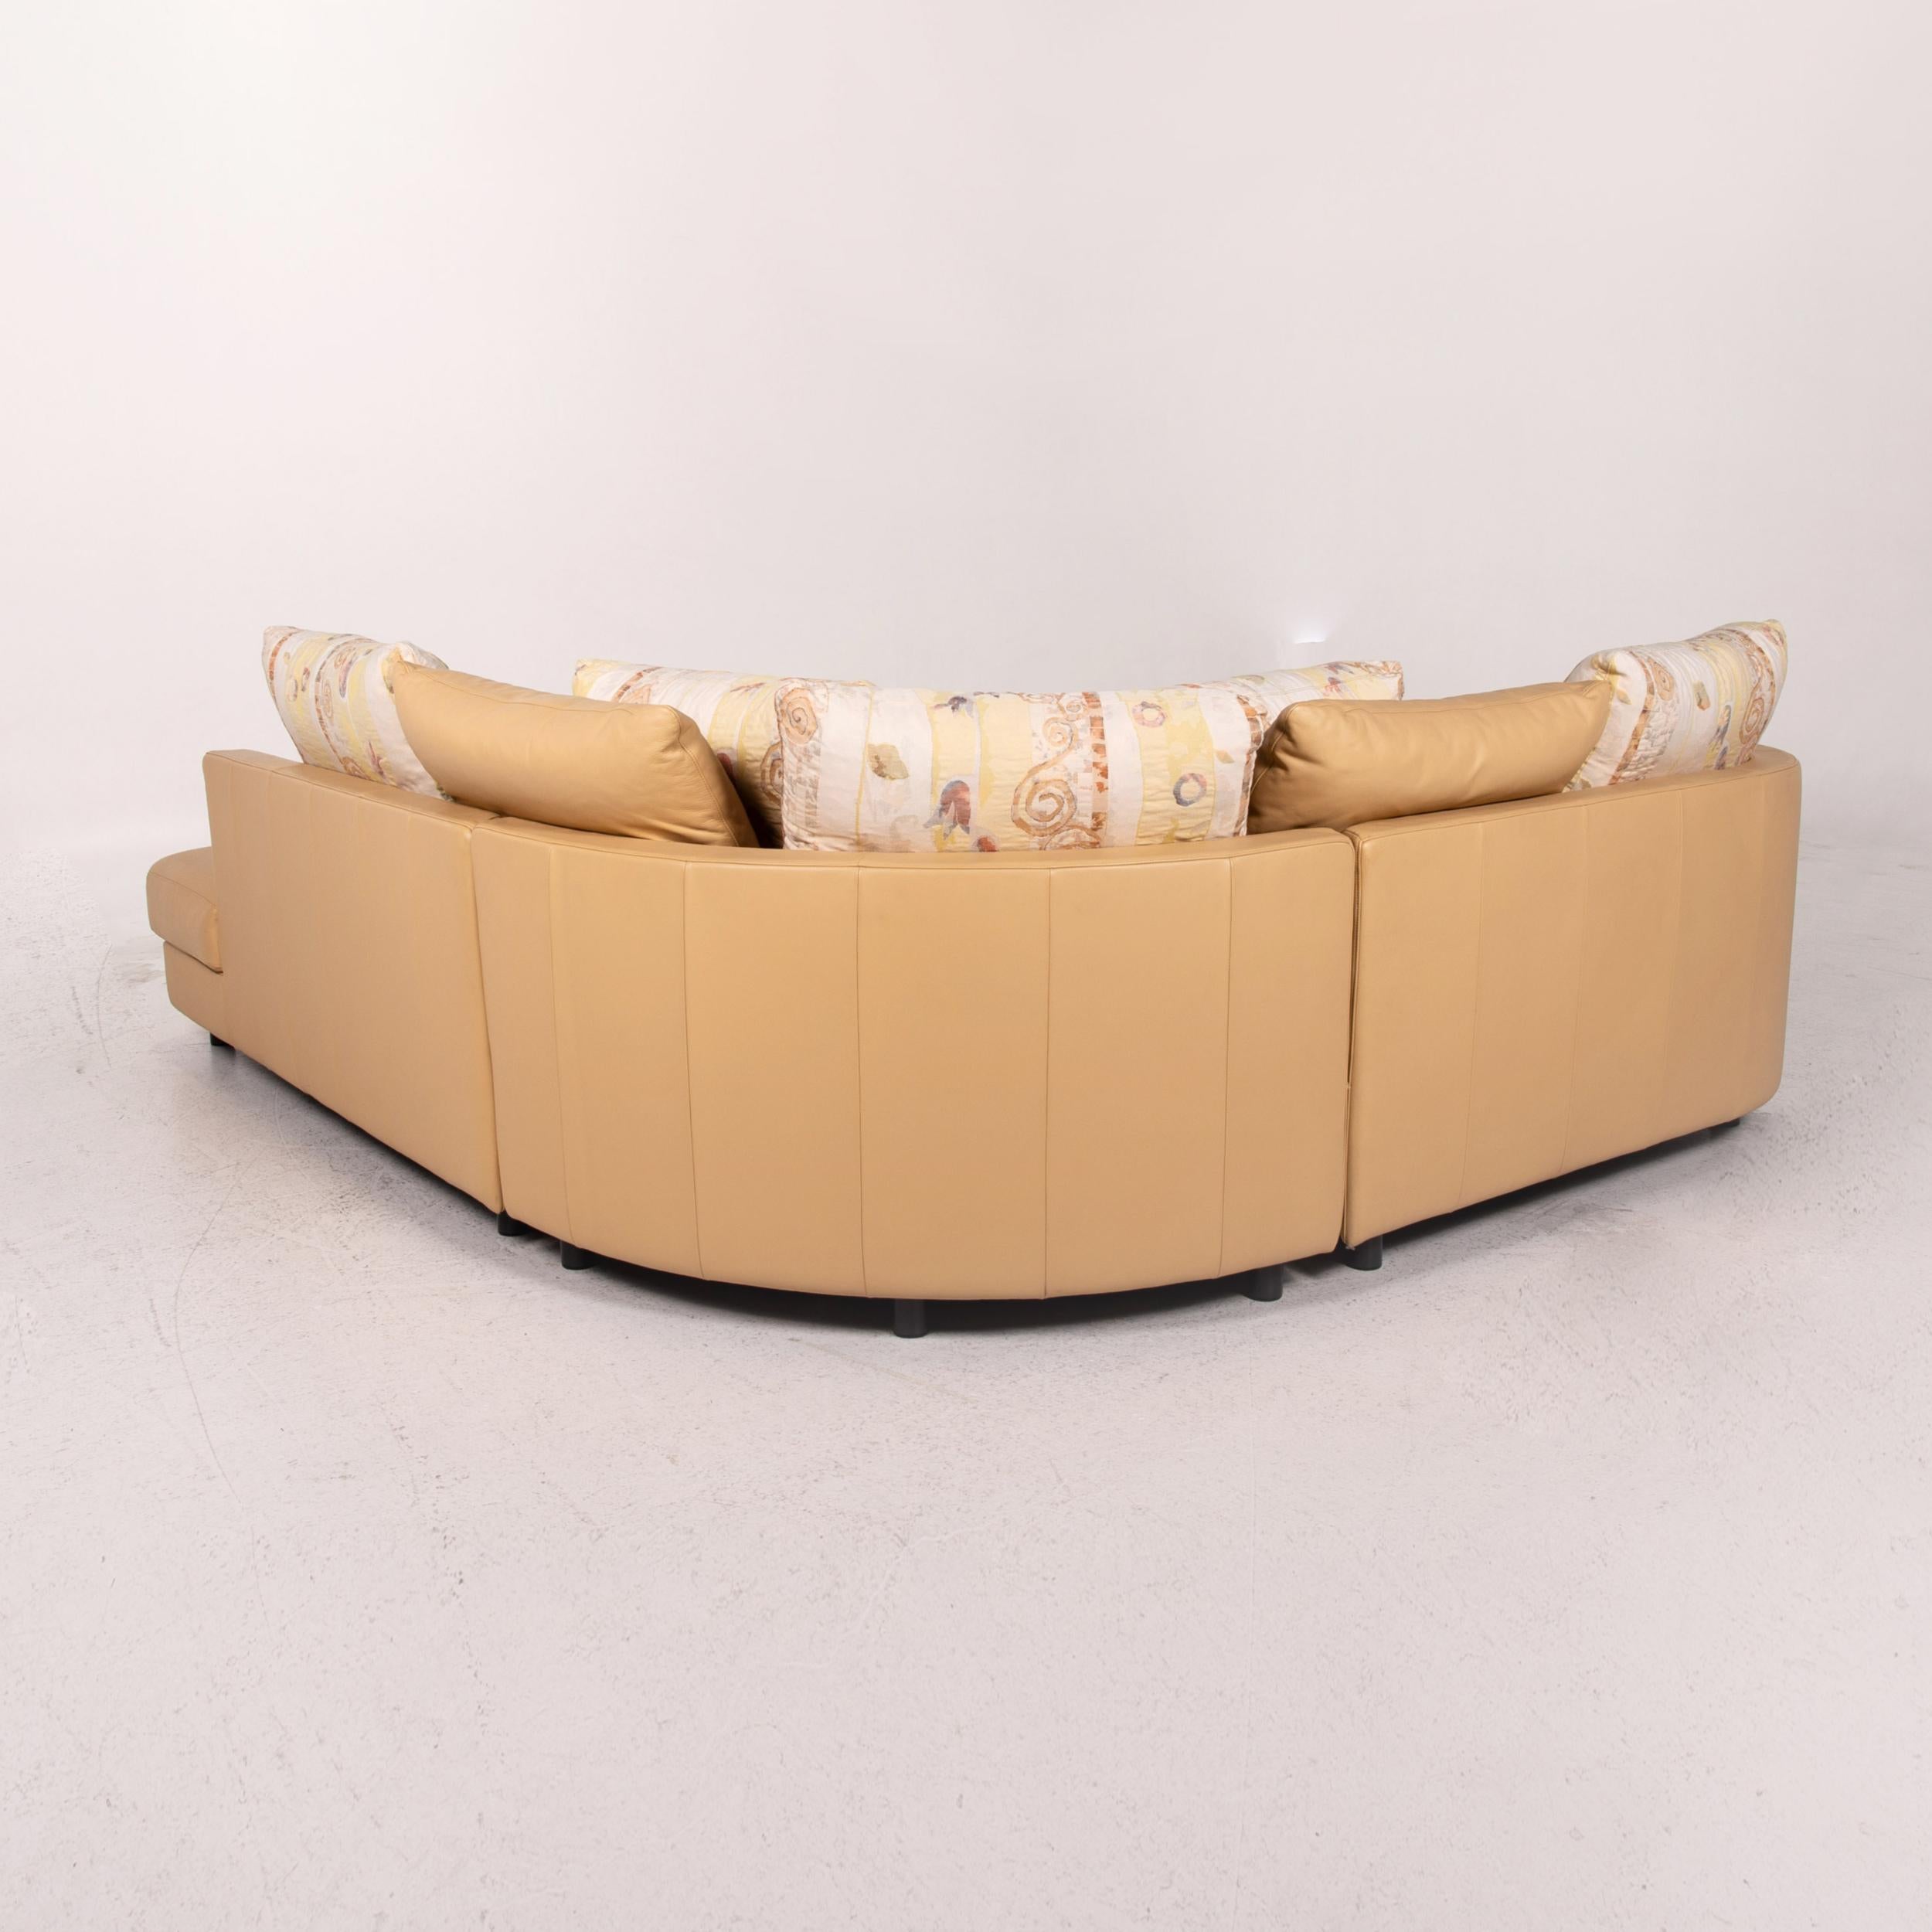 Rolf Benz Leather Corner Sofa Beige Patterned Sofa Couch 6